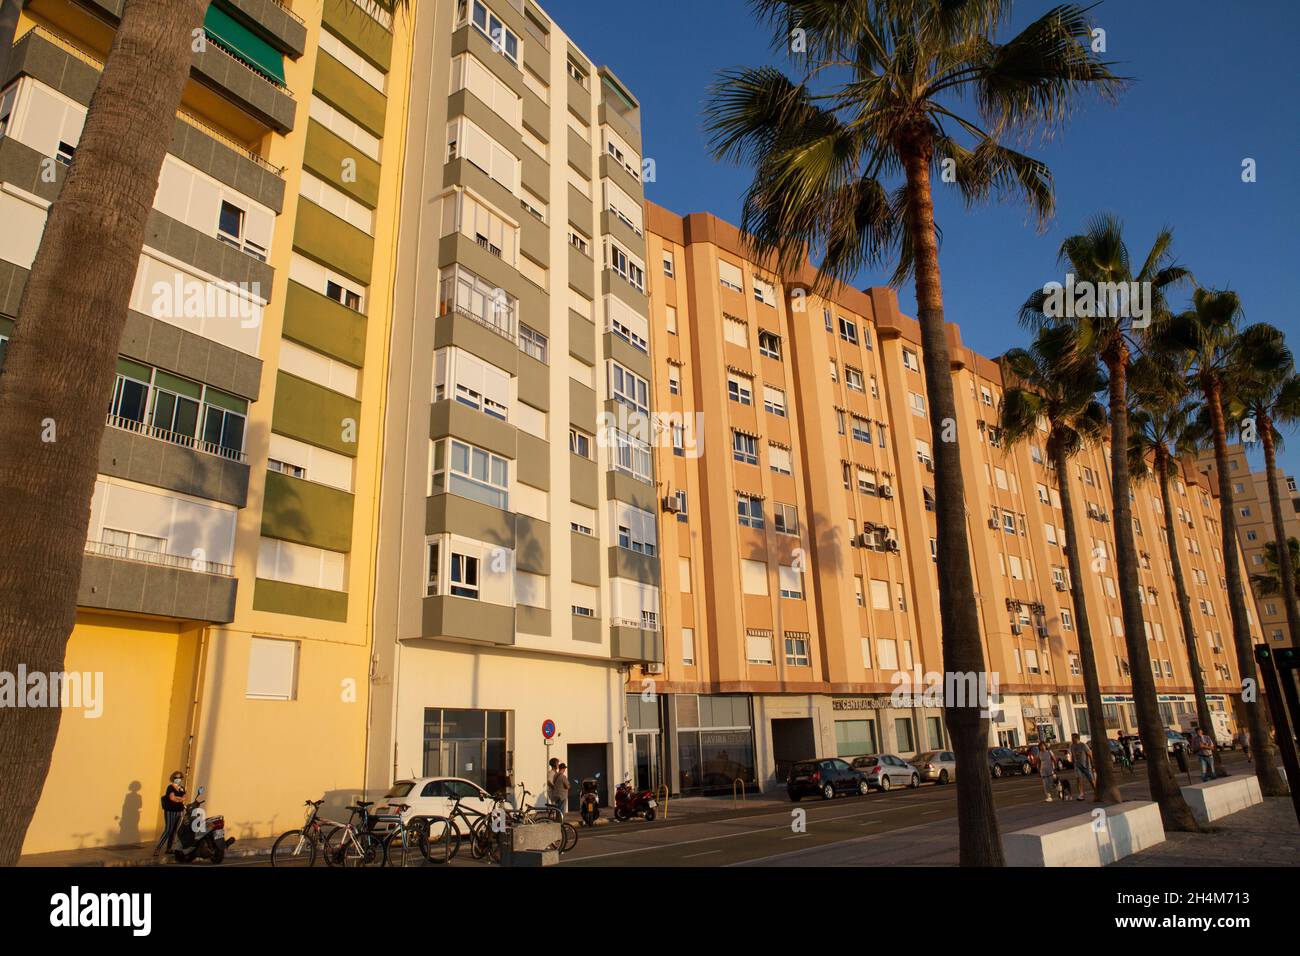 Apartments on Avenue Fernández Ladreda overlooking the seafront in Cadiz Stock Photo